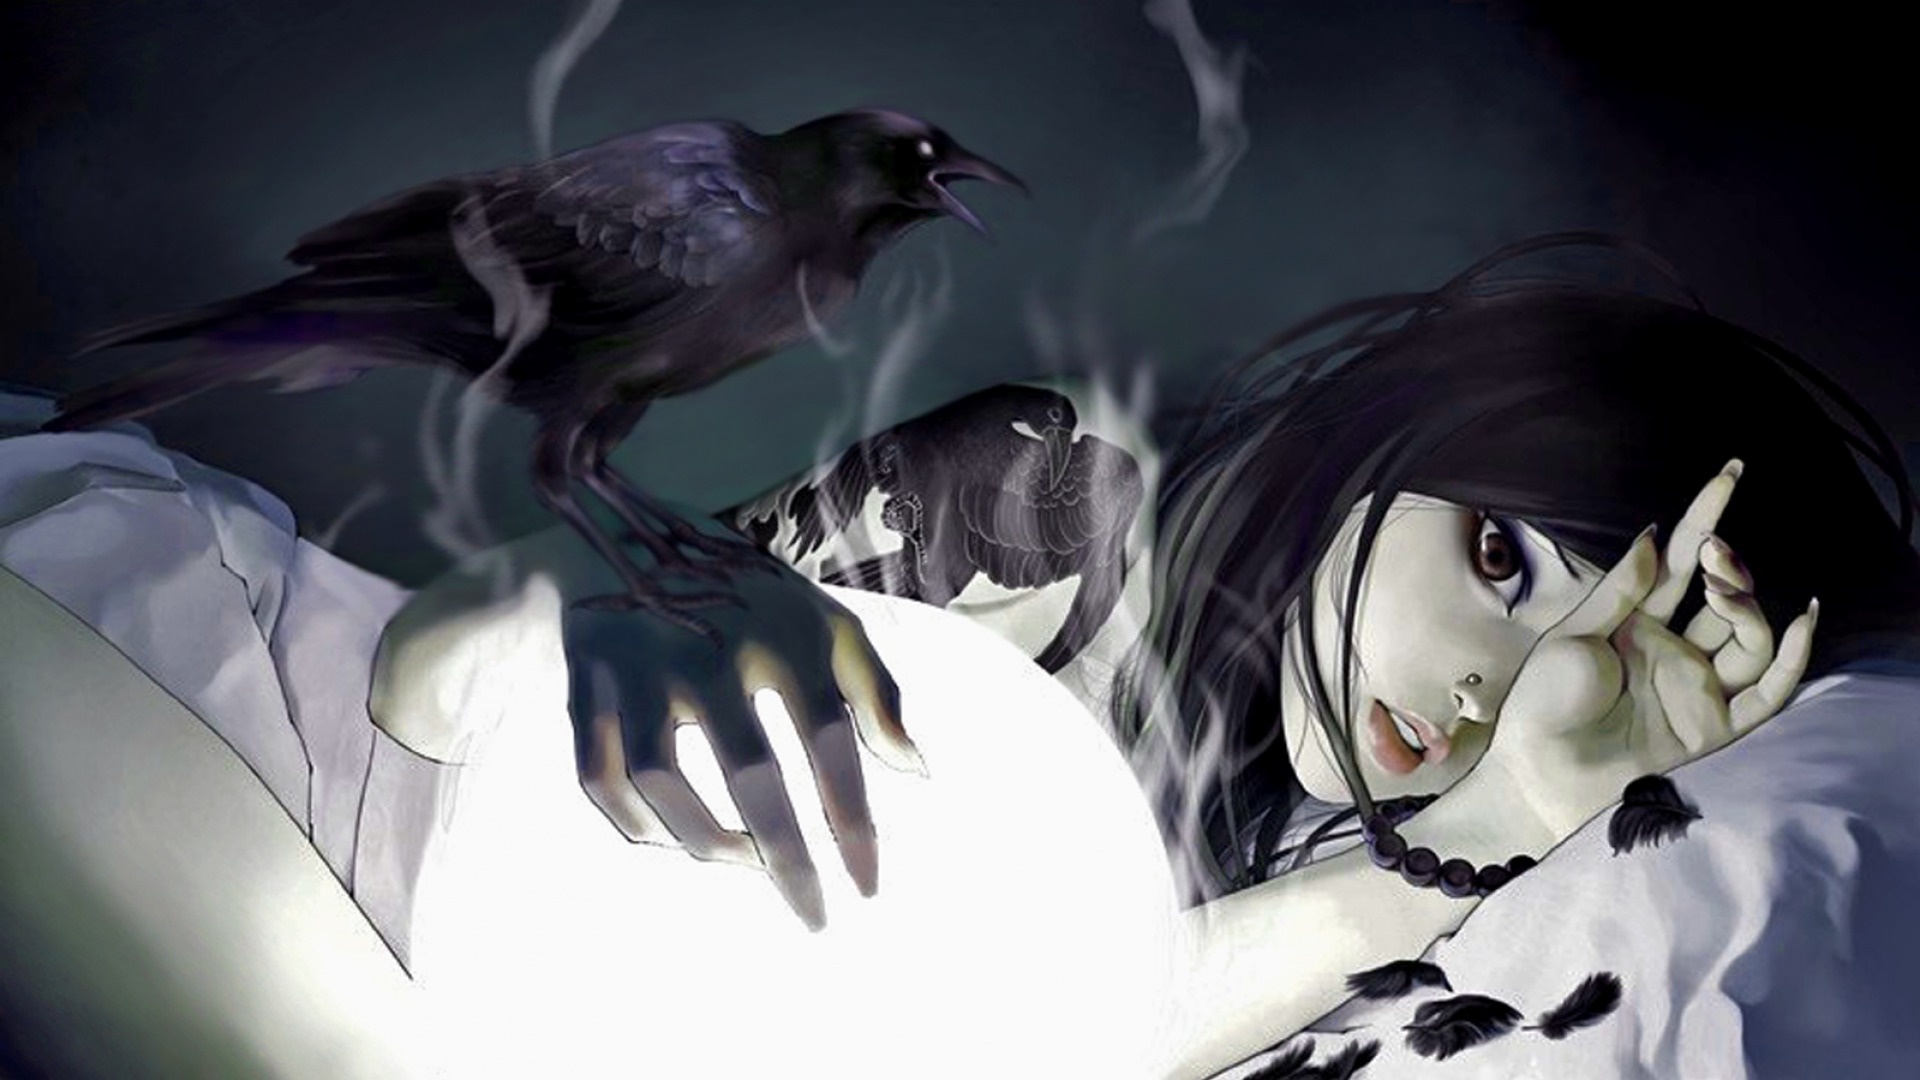 Gothic Anime: Goth girl with a raven tattoo, Mystical phenomenon, Ominous atmosphere. 1920x1080 Full HD Background.